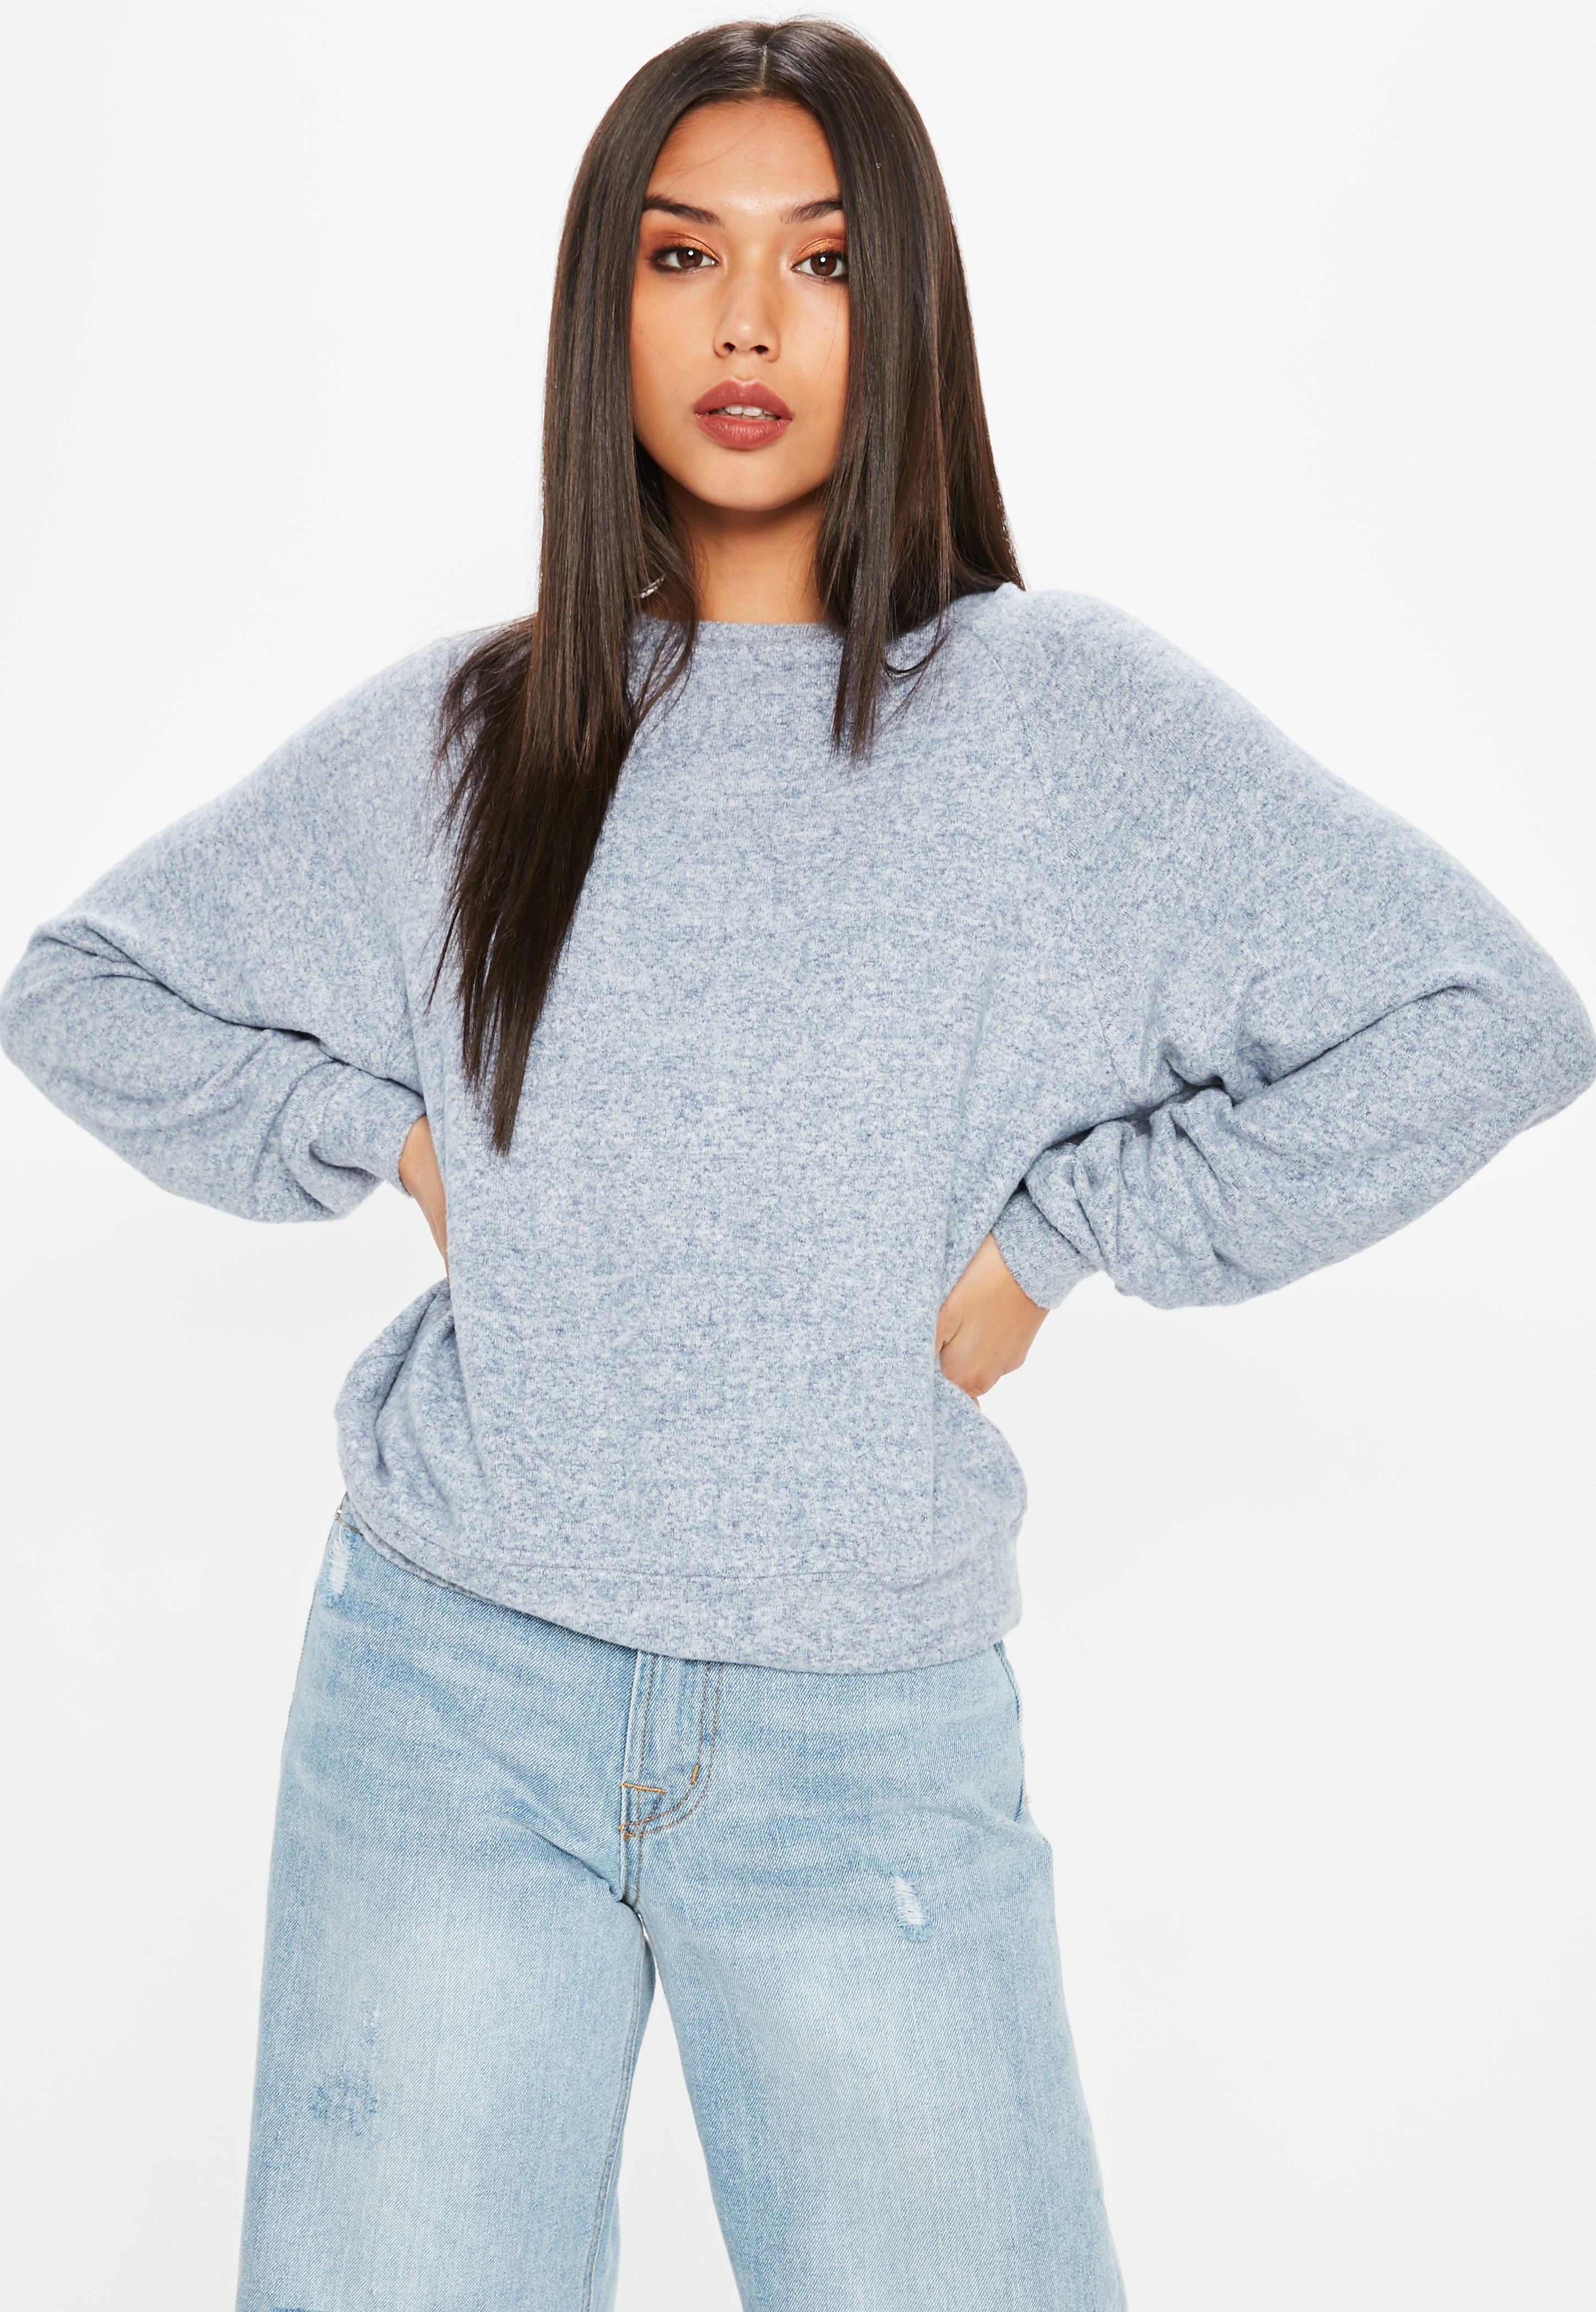 Lyst - Missguided Navy Brushed Crew Neck Sweatshirt in Blue